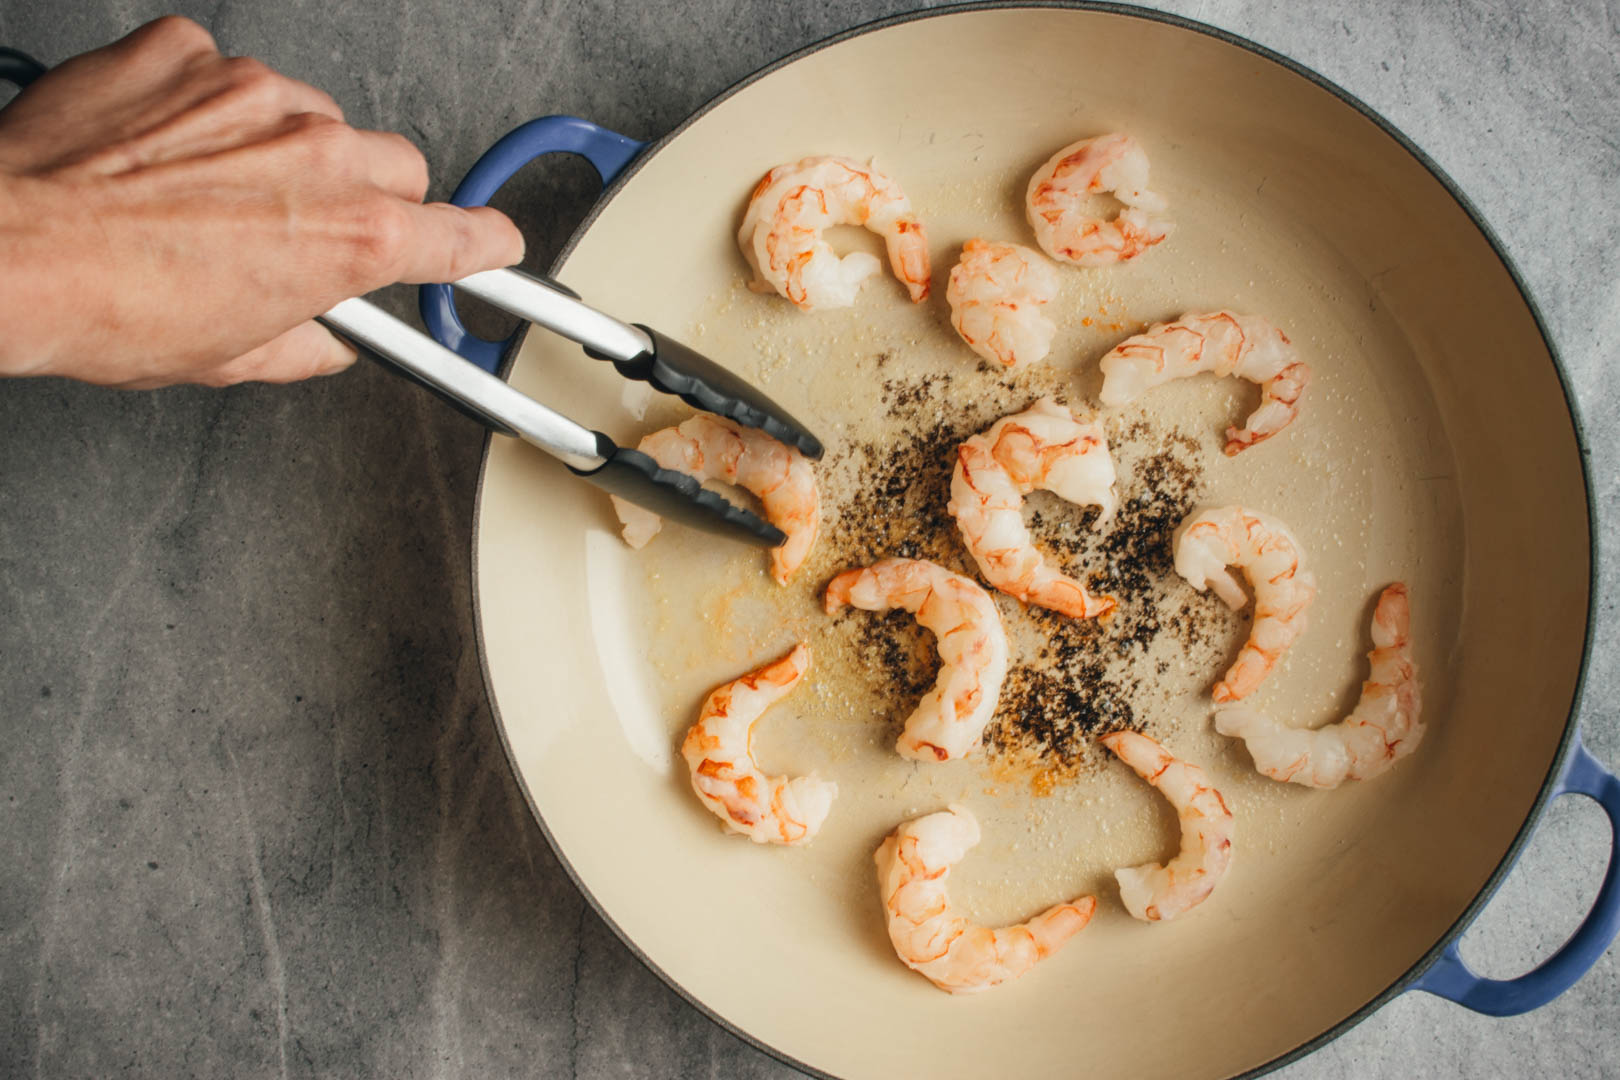 Saute shrimp in a skillet with tongs on the side